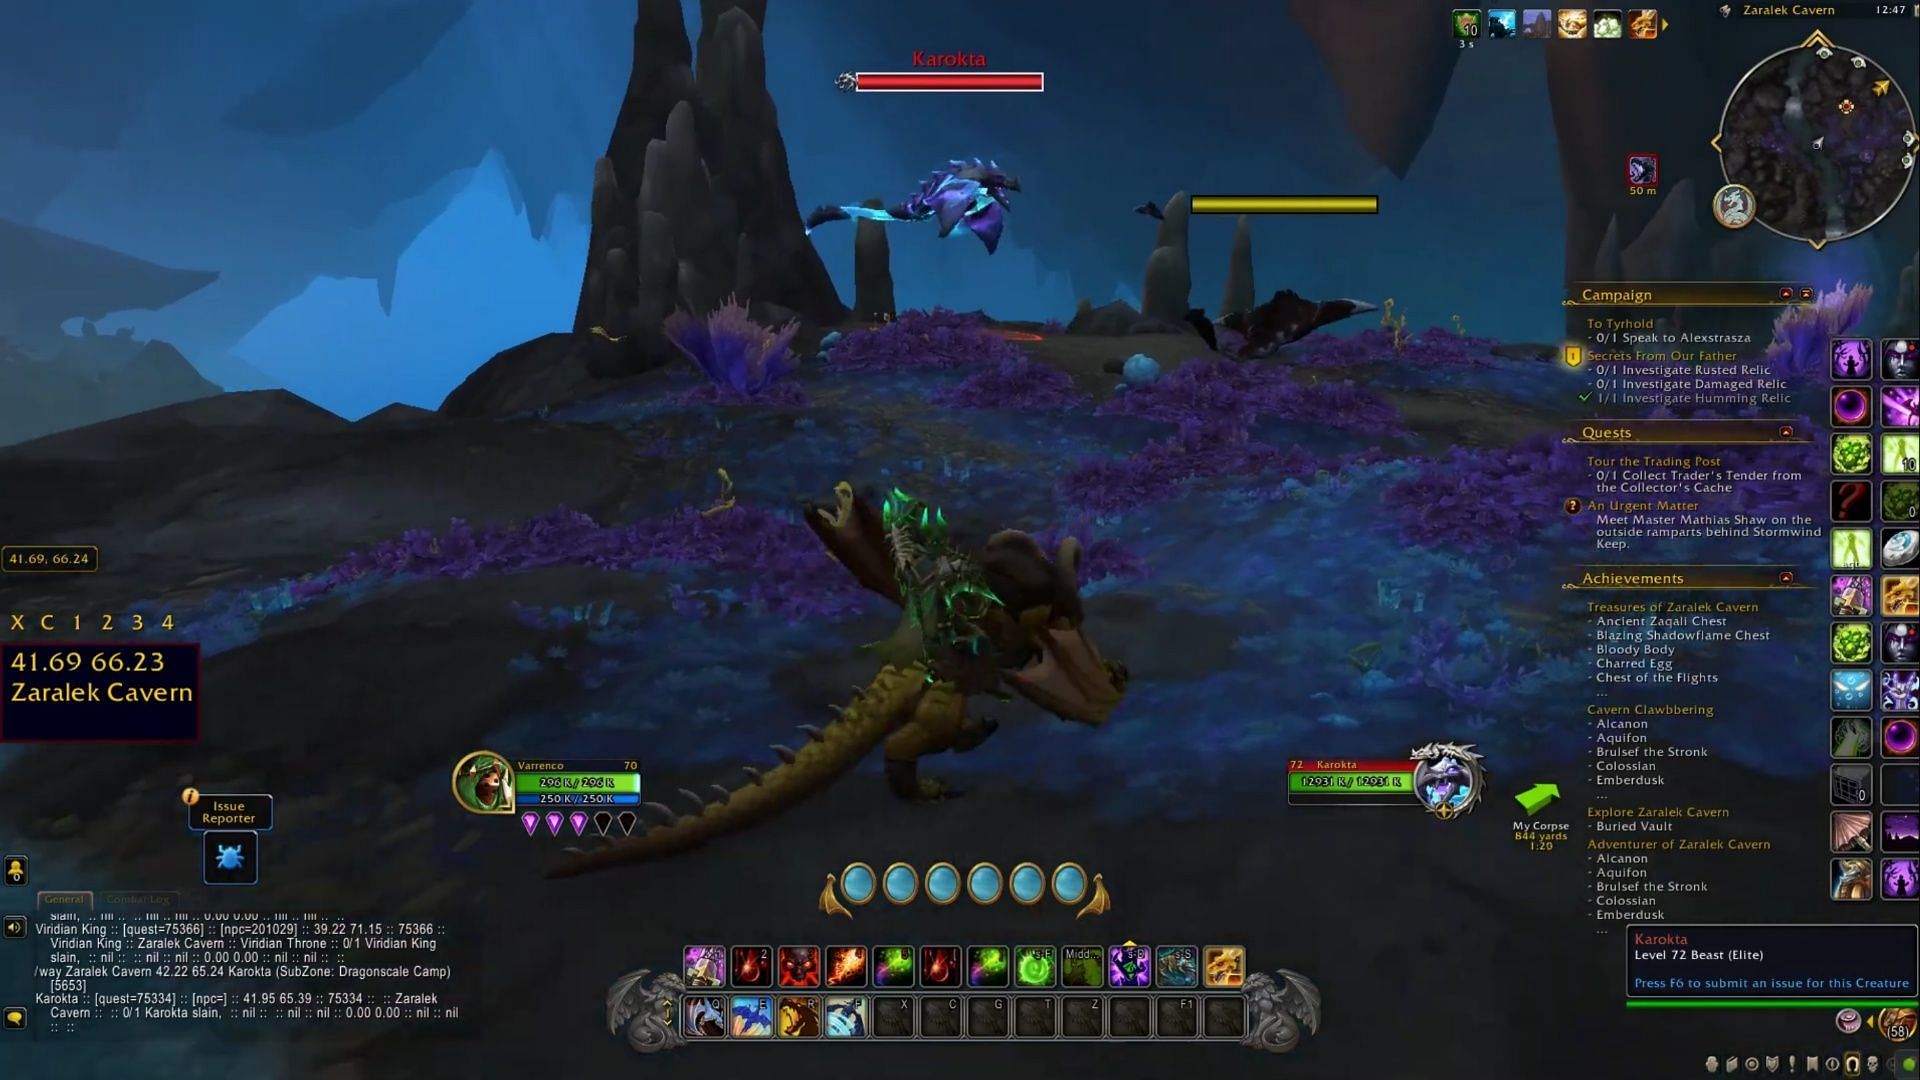 Cobalt Shalewing is one of the new rare mounts in World of Warcraft: Dragonflight.